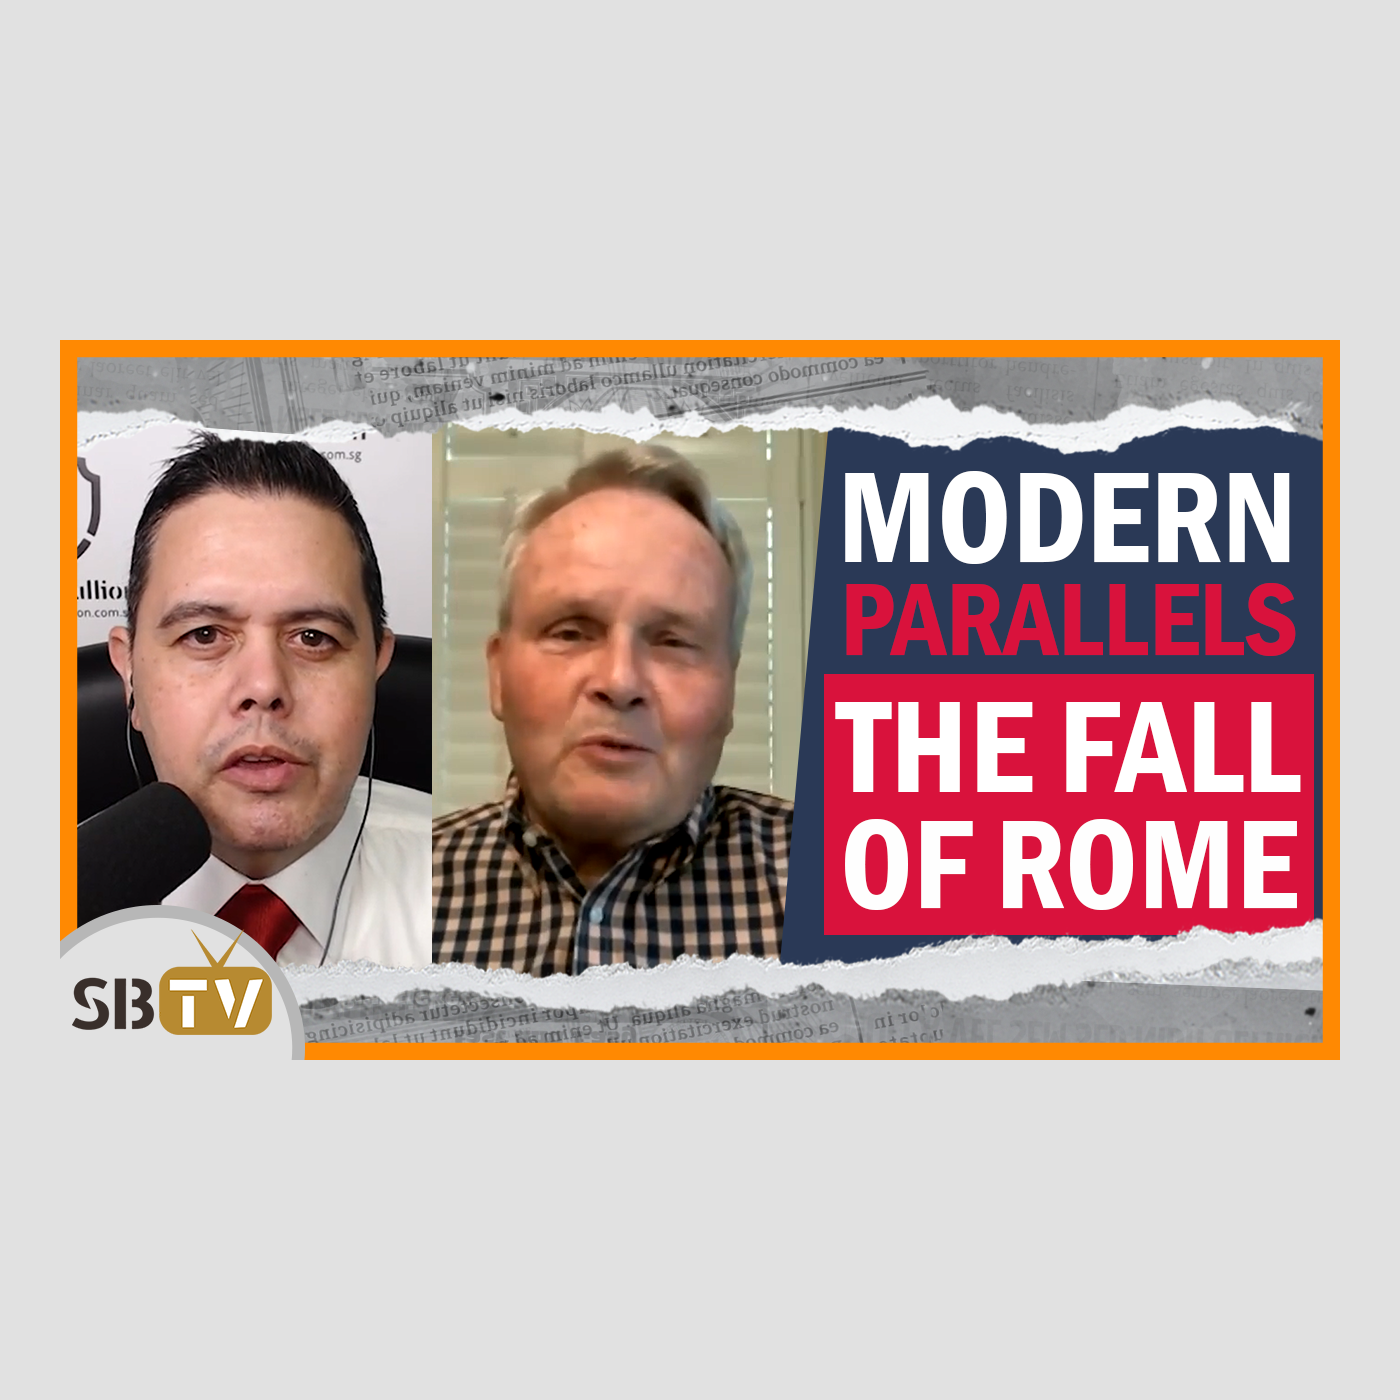 158 Lawrence Reed - Modern Parallels to the Fall of Rome